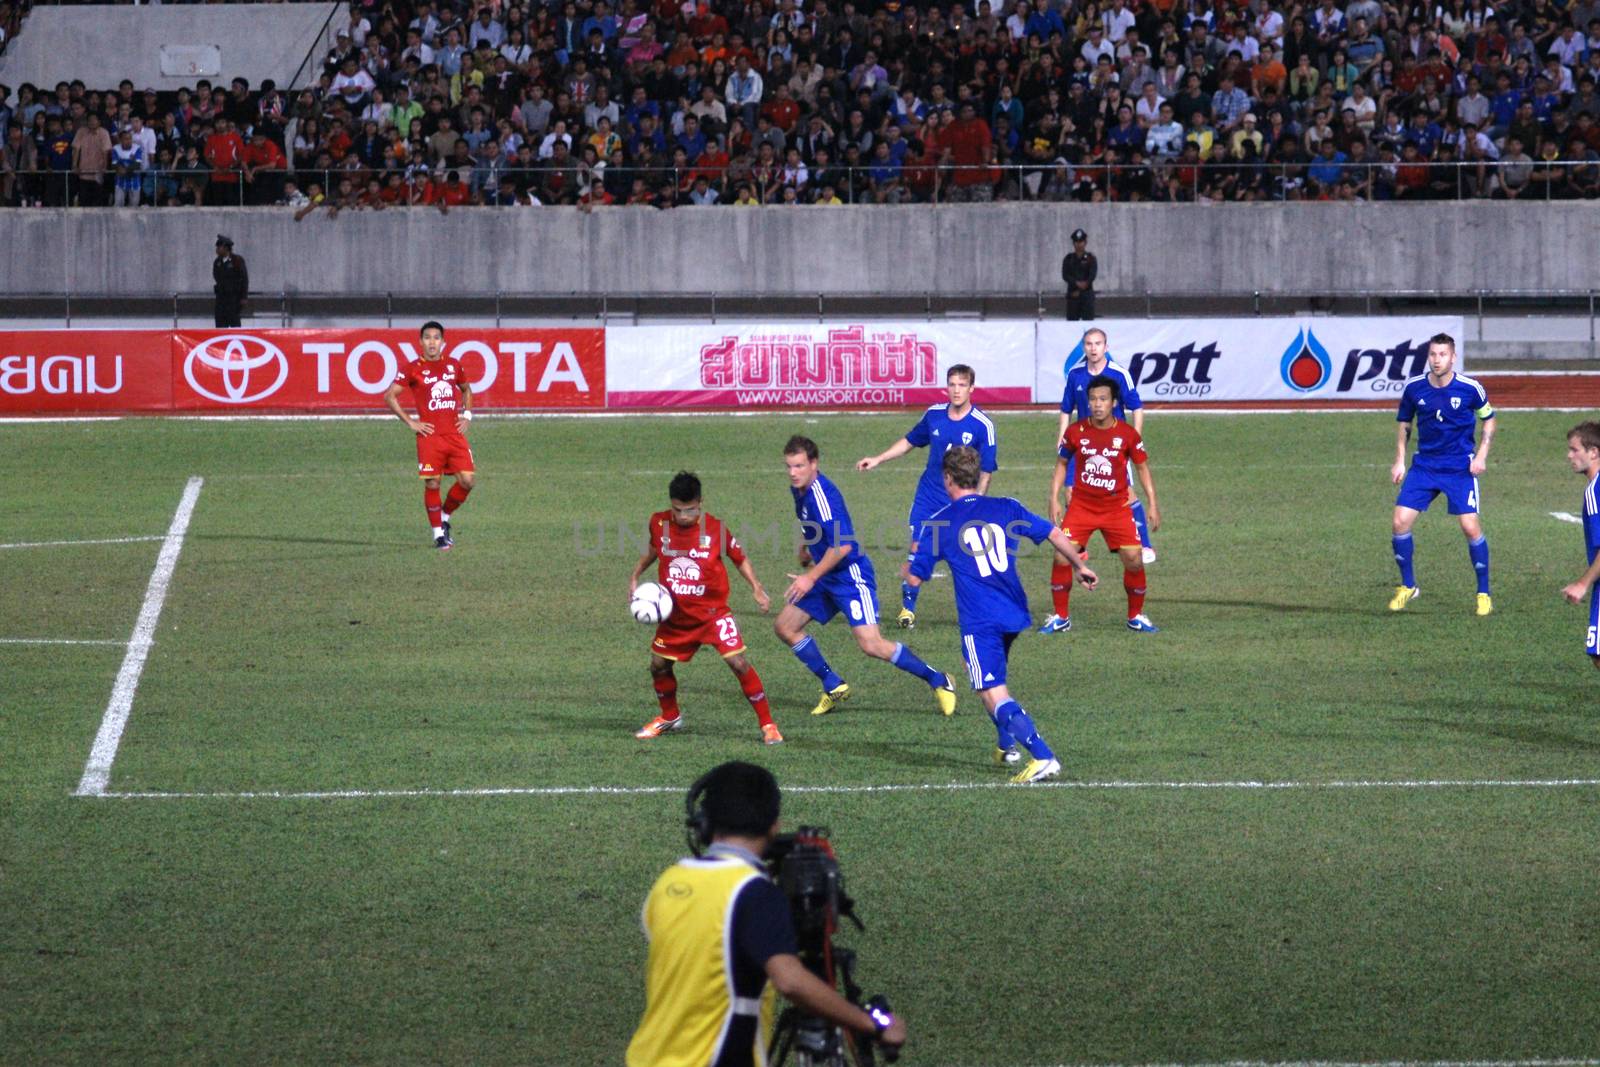 The 42nd King's cup international football match between Thailand and Finland at 700th Anniversary Stadium in Chiangmai, Thailand. Finland defeat Thailand 3-1 to win. by mranucha